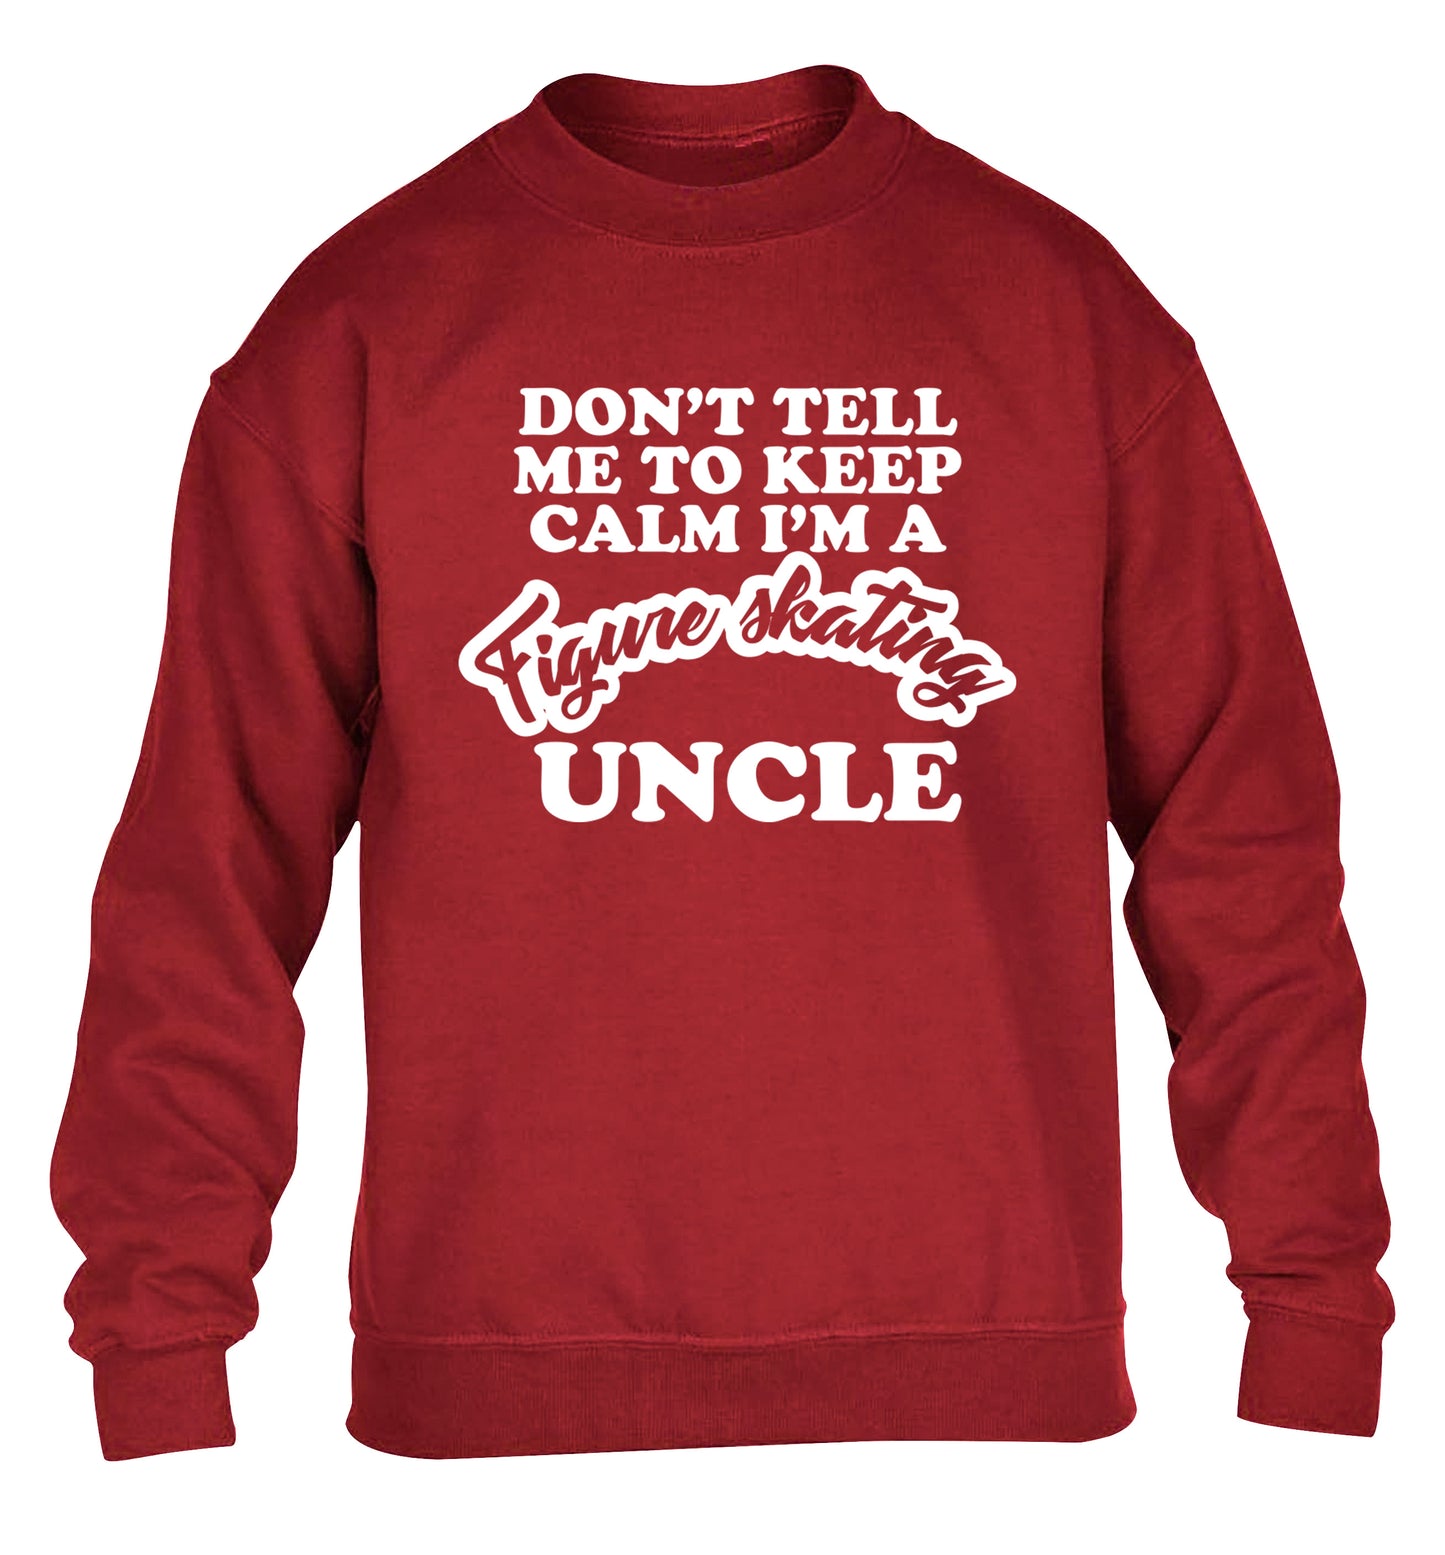 Don't tell me to keep calm I'm a figure skating uncle children's grey sweater 12-14 Years